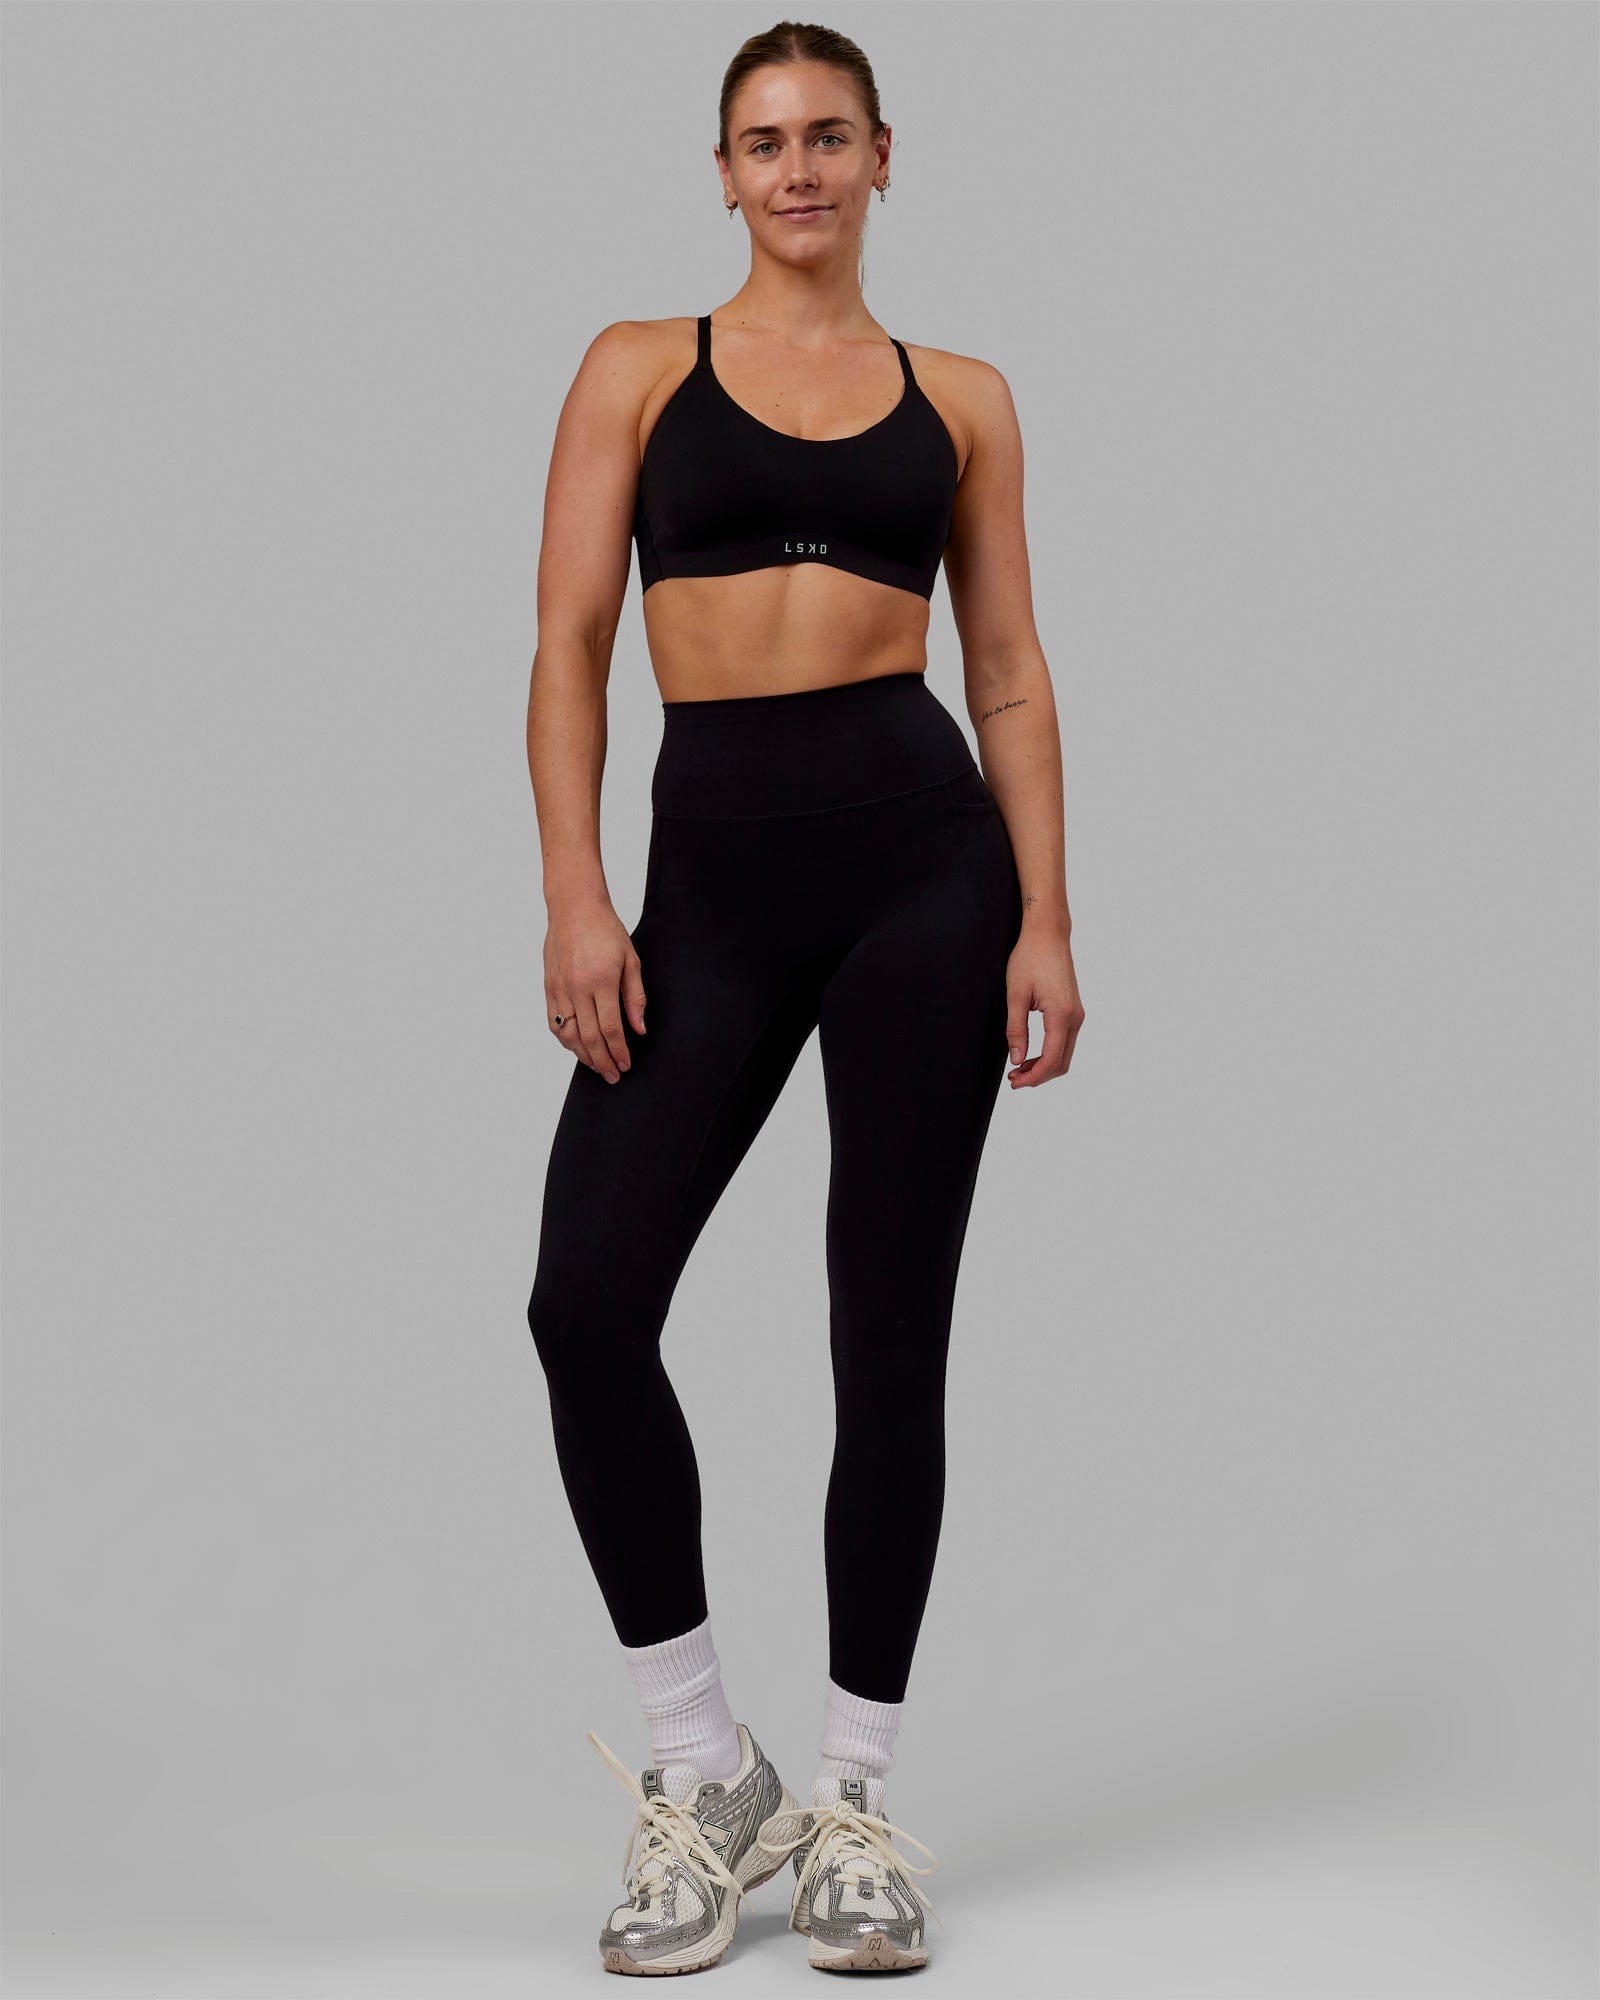 LSKD - ✨ AGILE SPORTS BRA ✨⁠ The new relaxed everyday fit